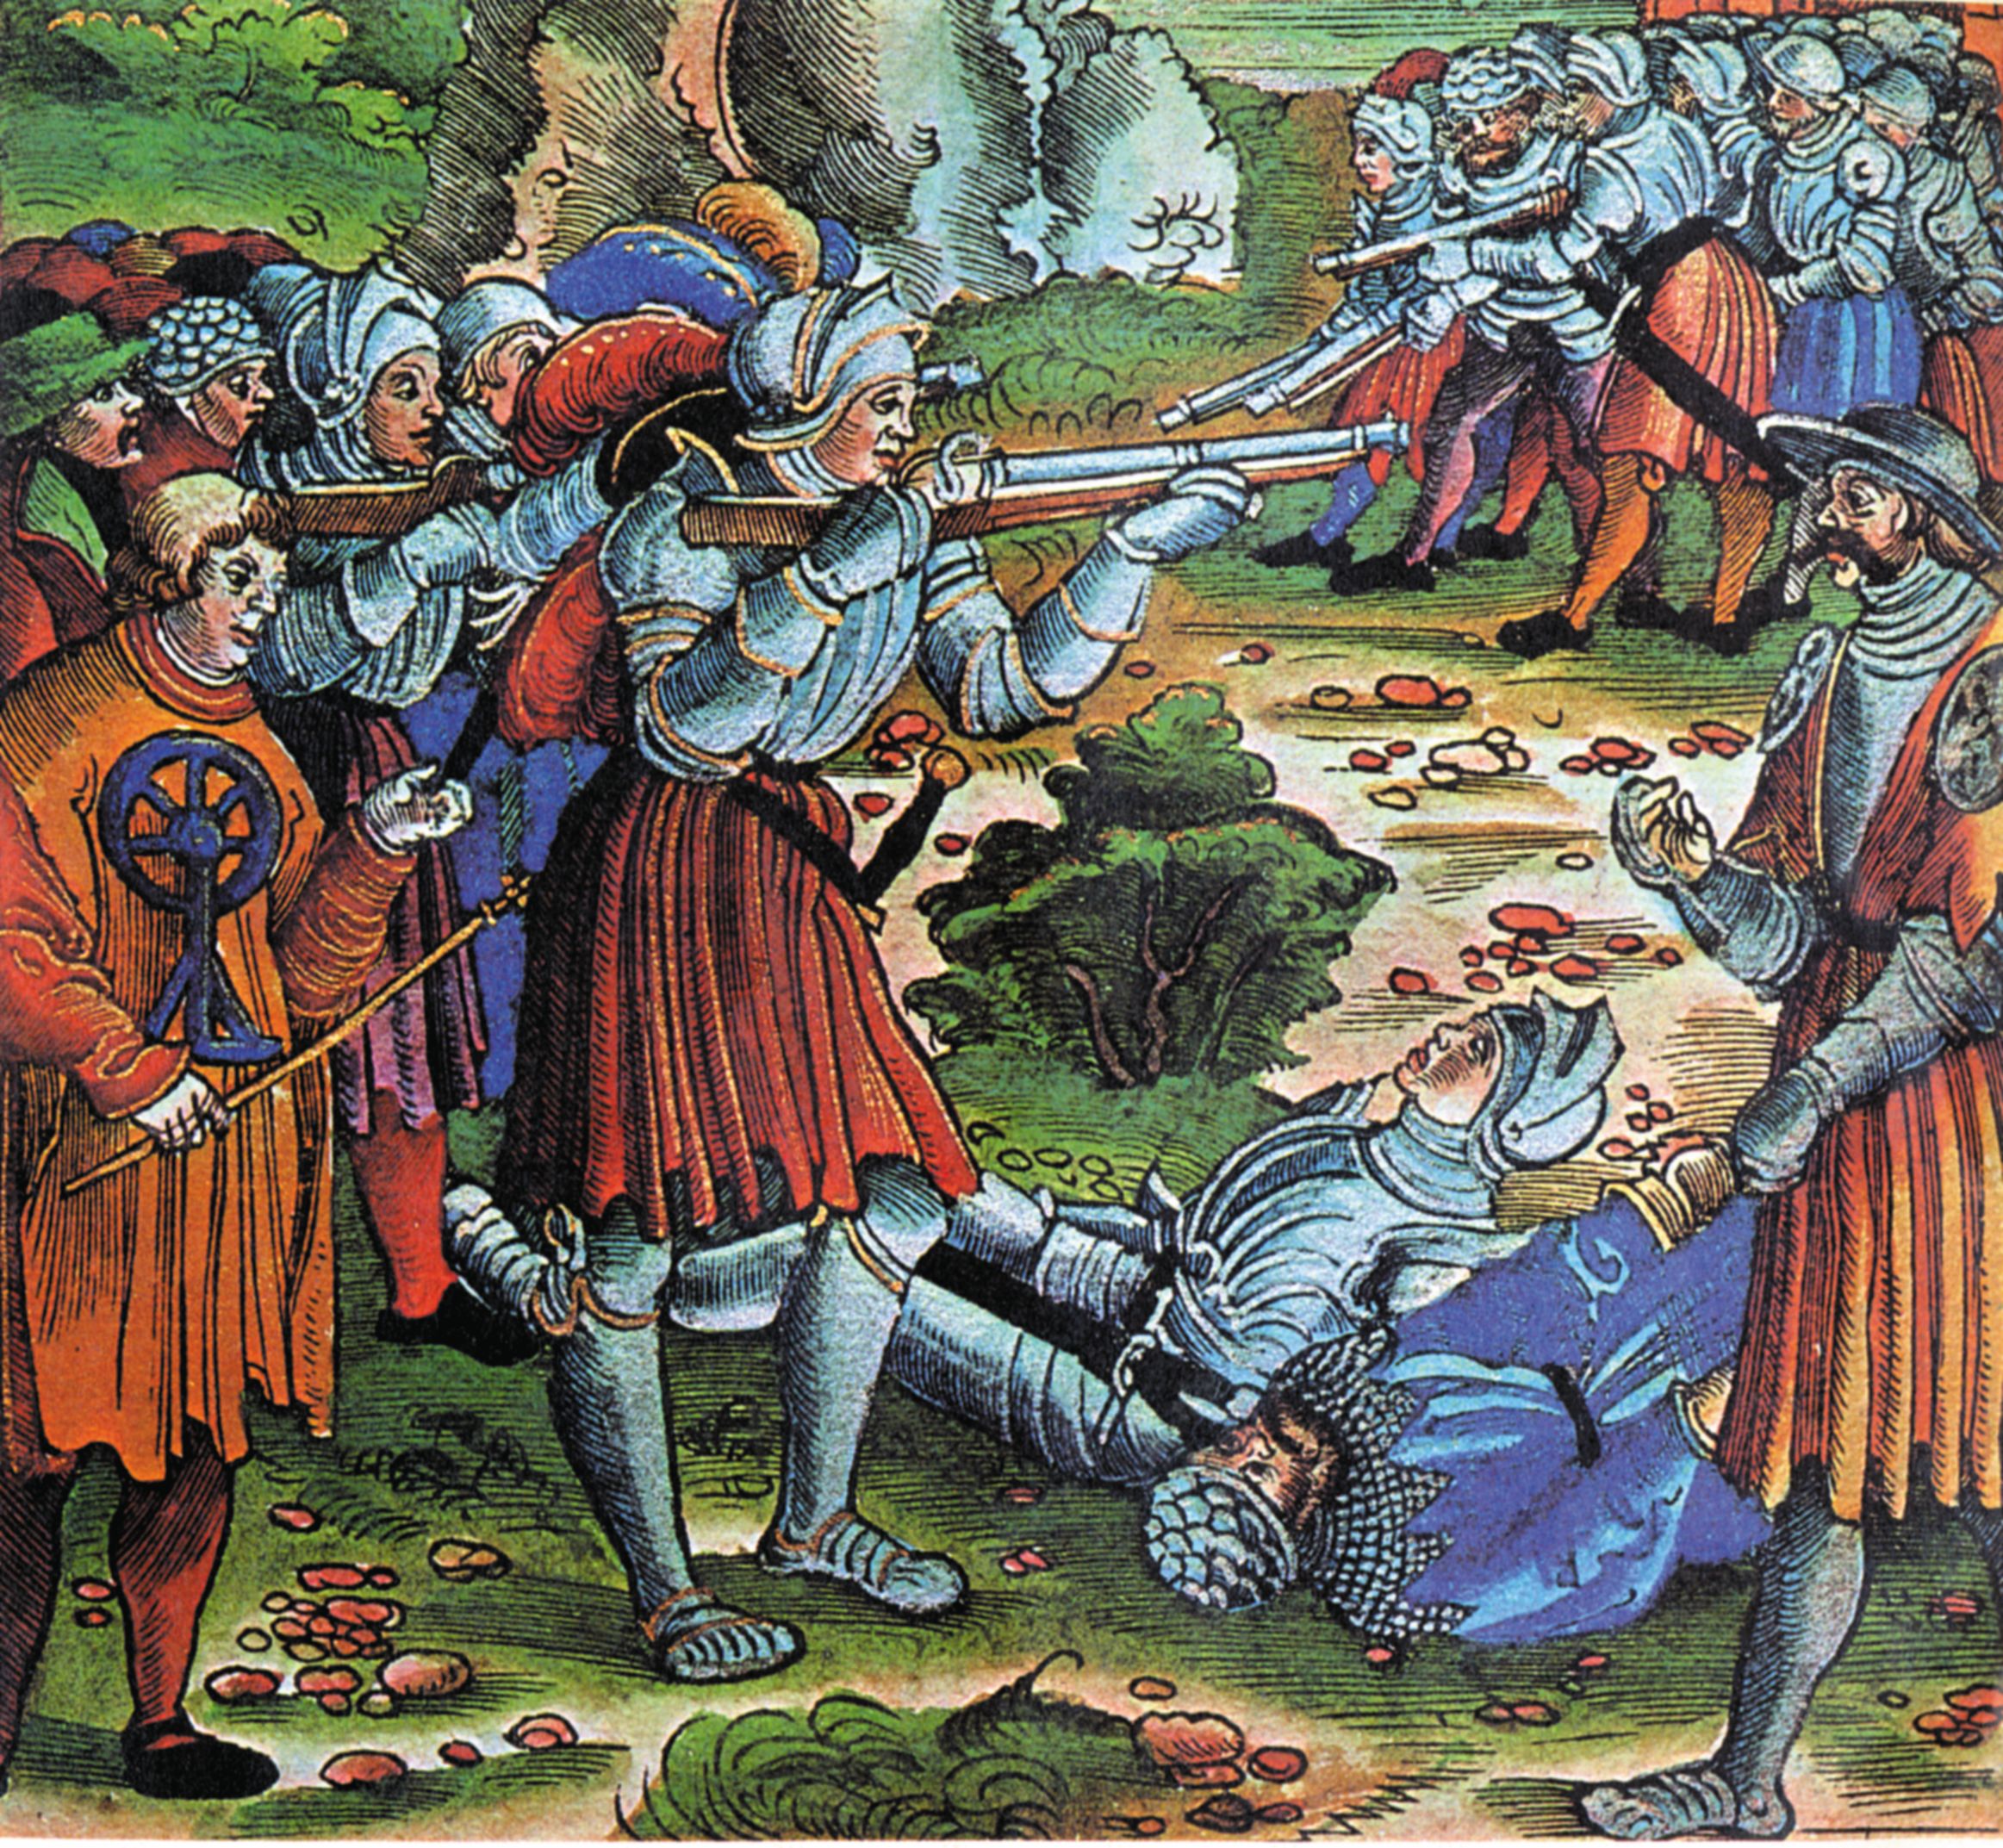 Arquebusiers flourish their lethal new weapons in this 15th-century German manuscript. Cordoba caught on early to the weapon’s revolutionary potential.